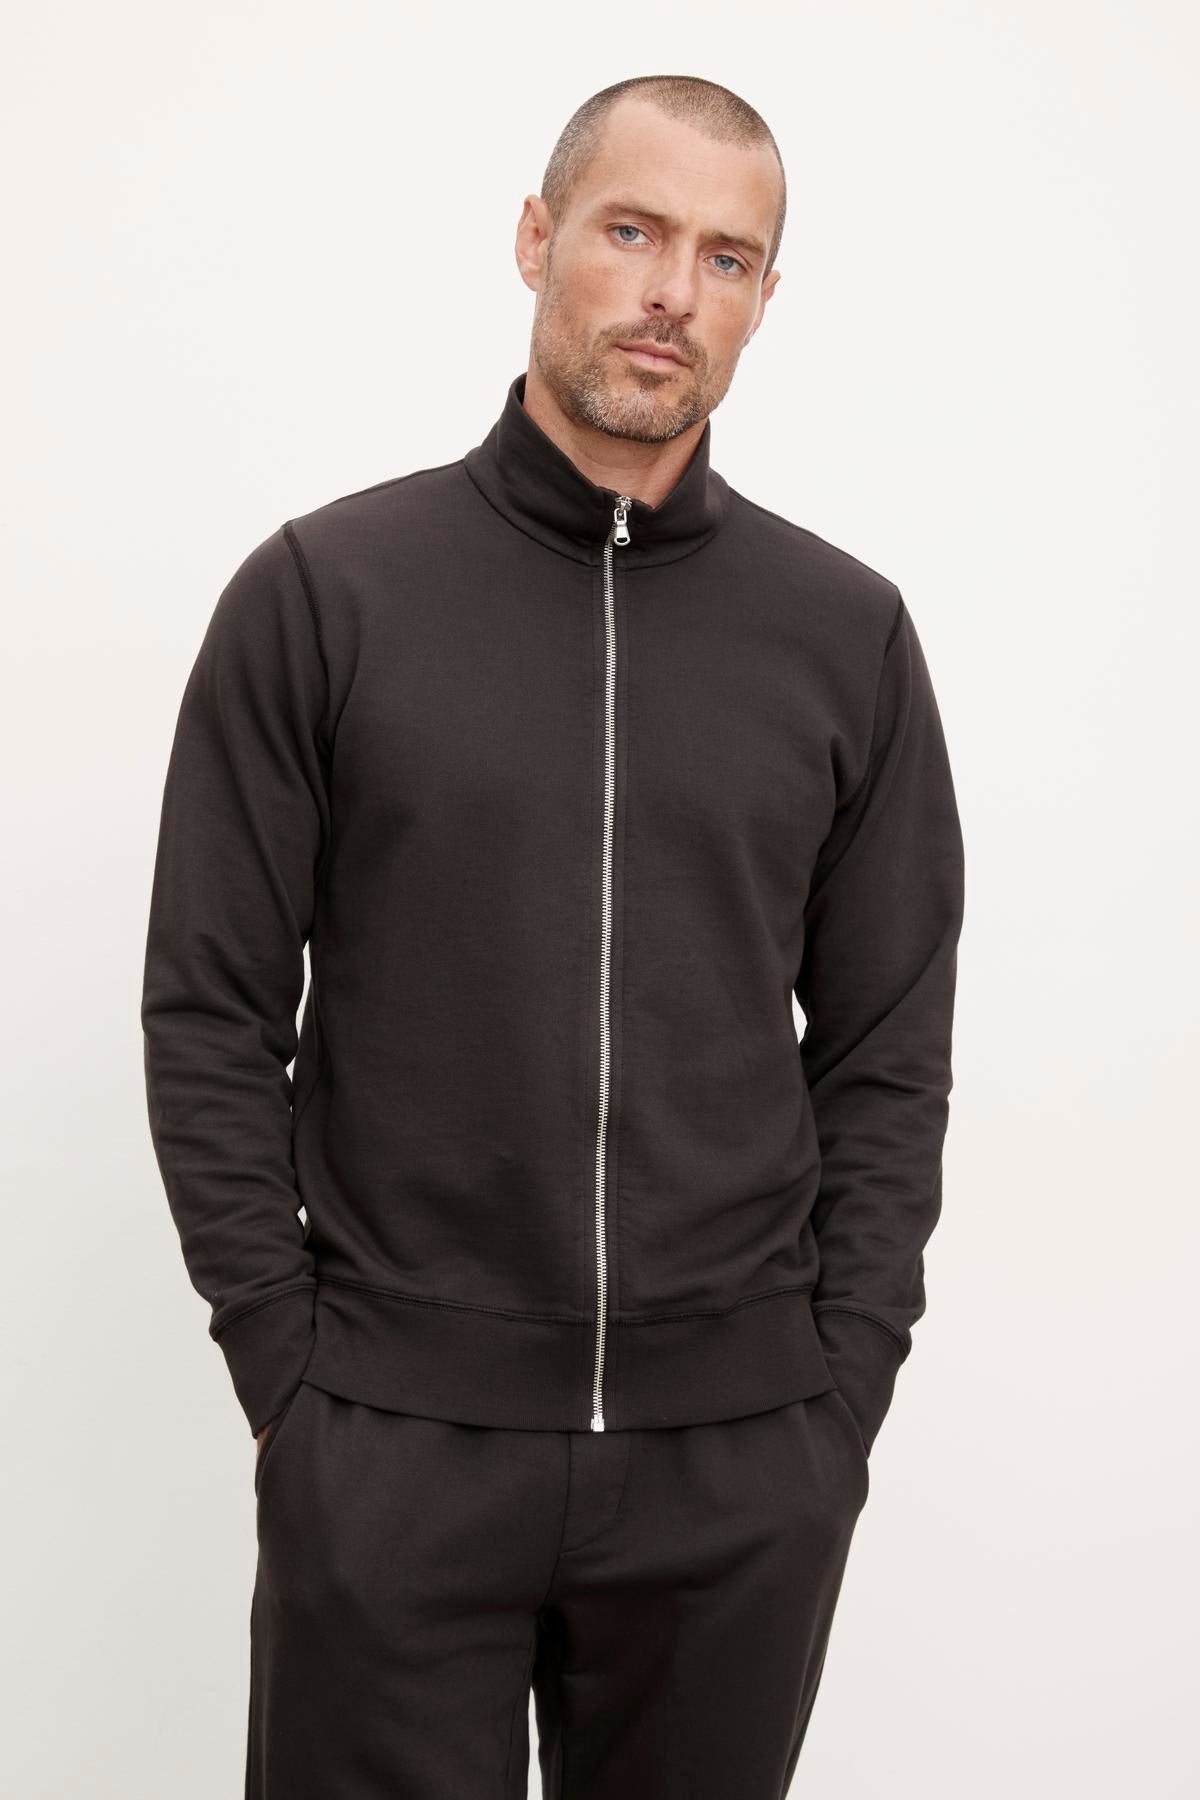 A man wearing a black Velvet by Graham & Spencer TERRY FRENCH TERRY FULL-ZIP sweatshirt from his casual wardrobe.-36008992800961